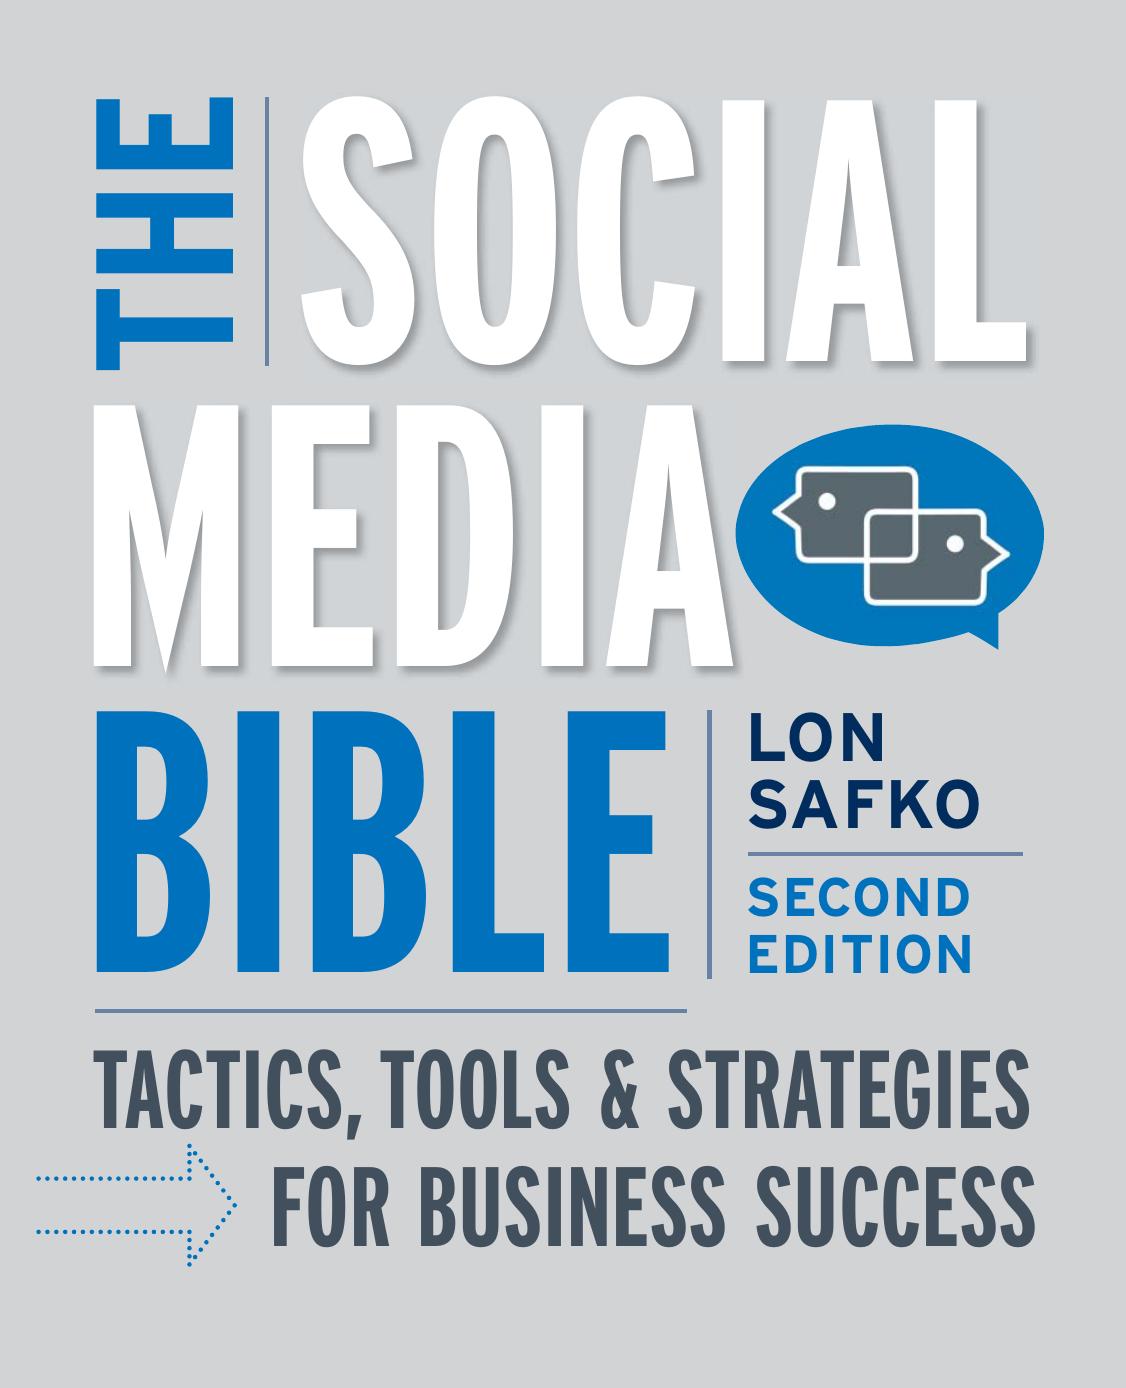 The Social Media Bible: Tactics, Tools, and Strategies for Business Success, Second Edition